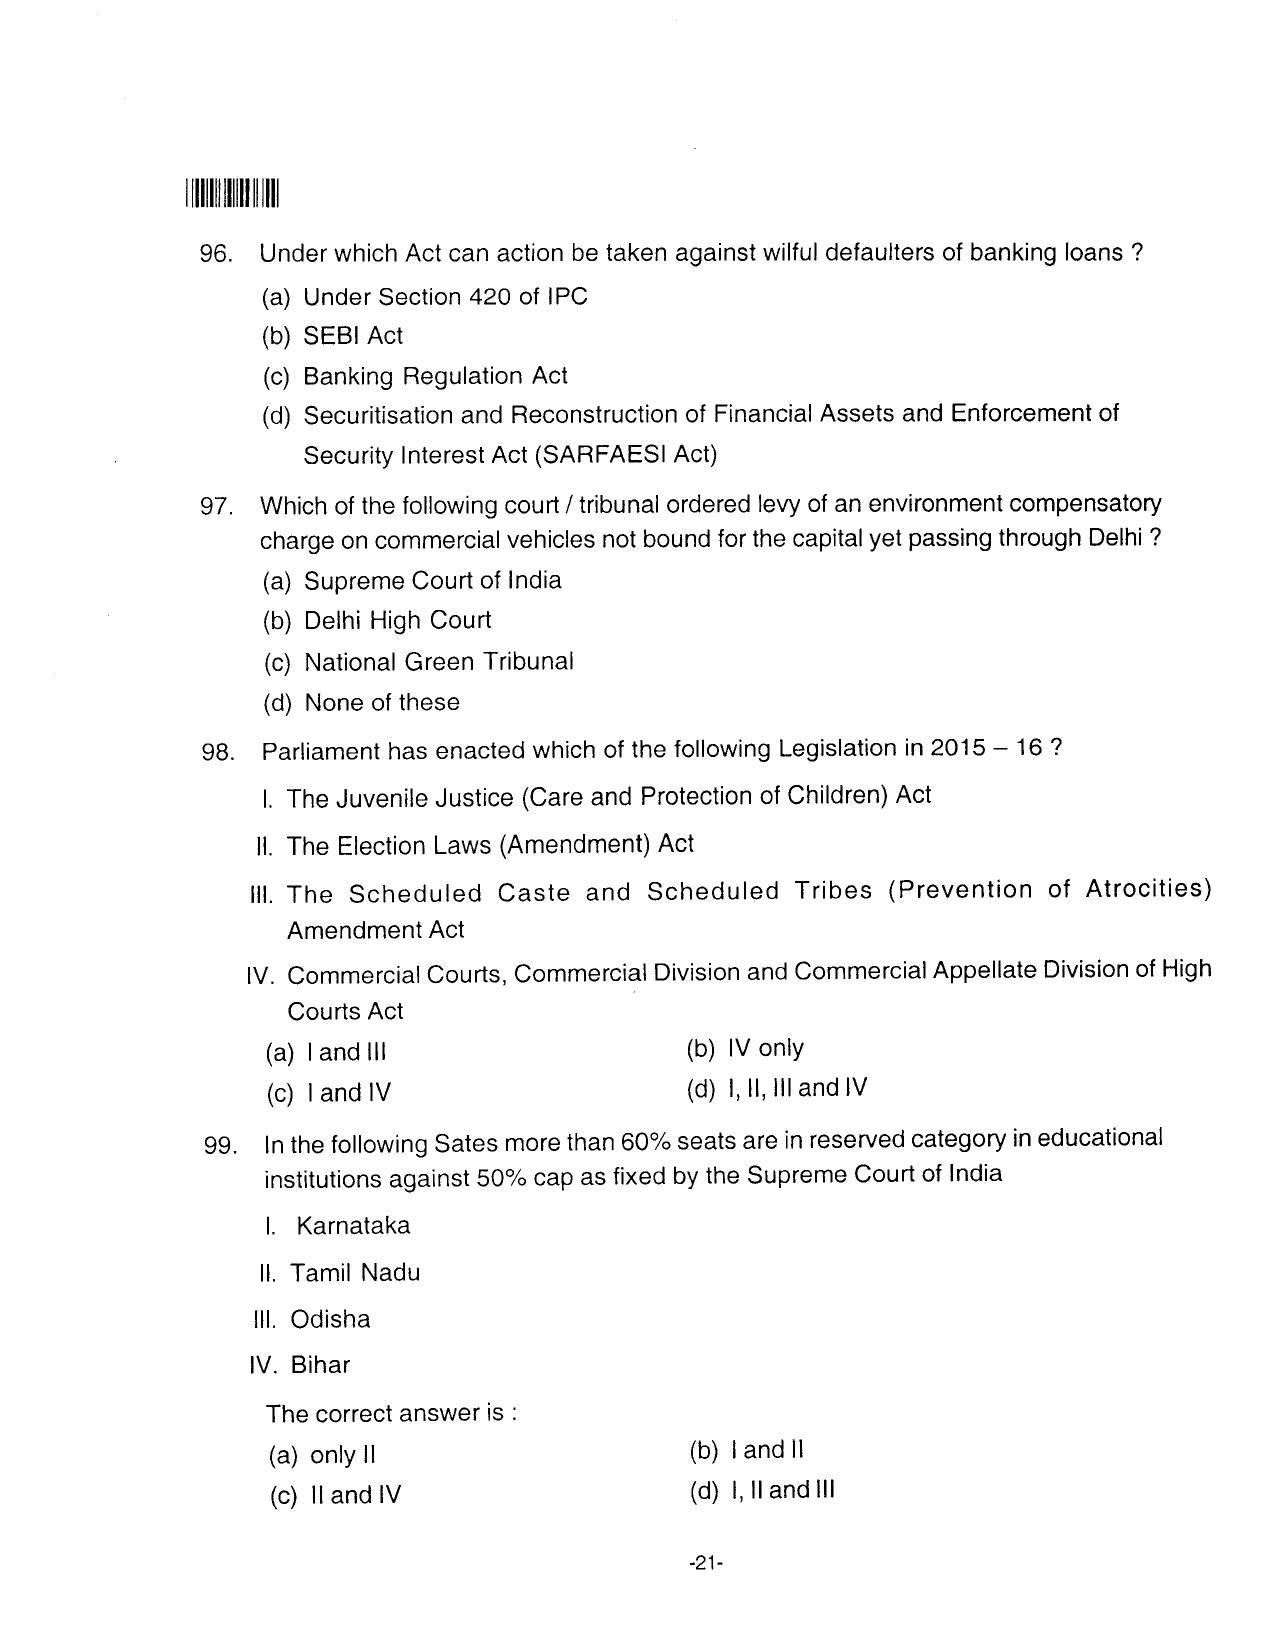 AILET 2016 Question Paper for BA LLB - Page 21